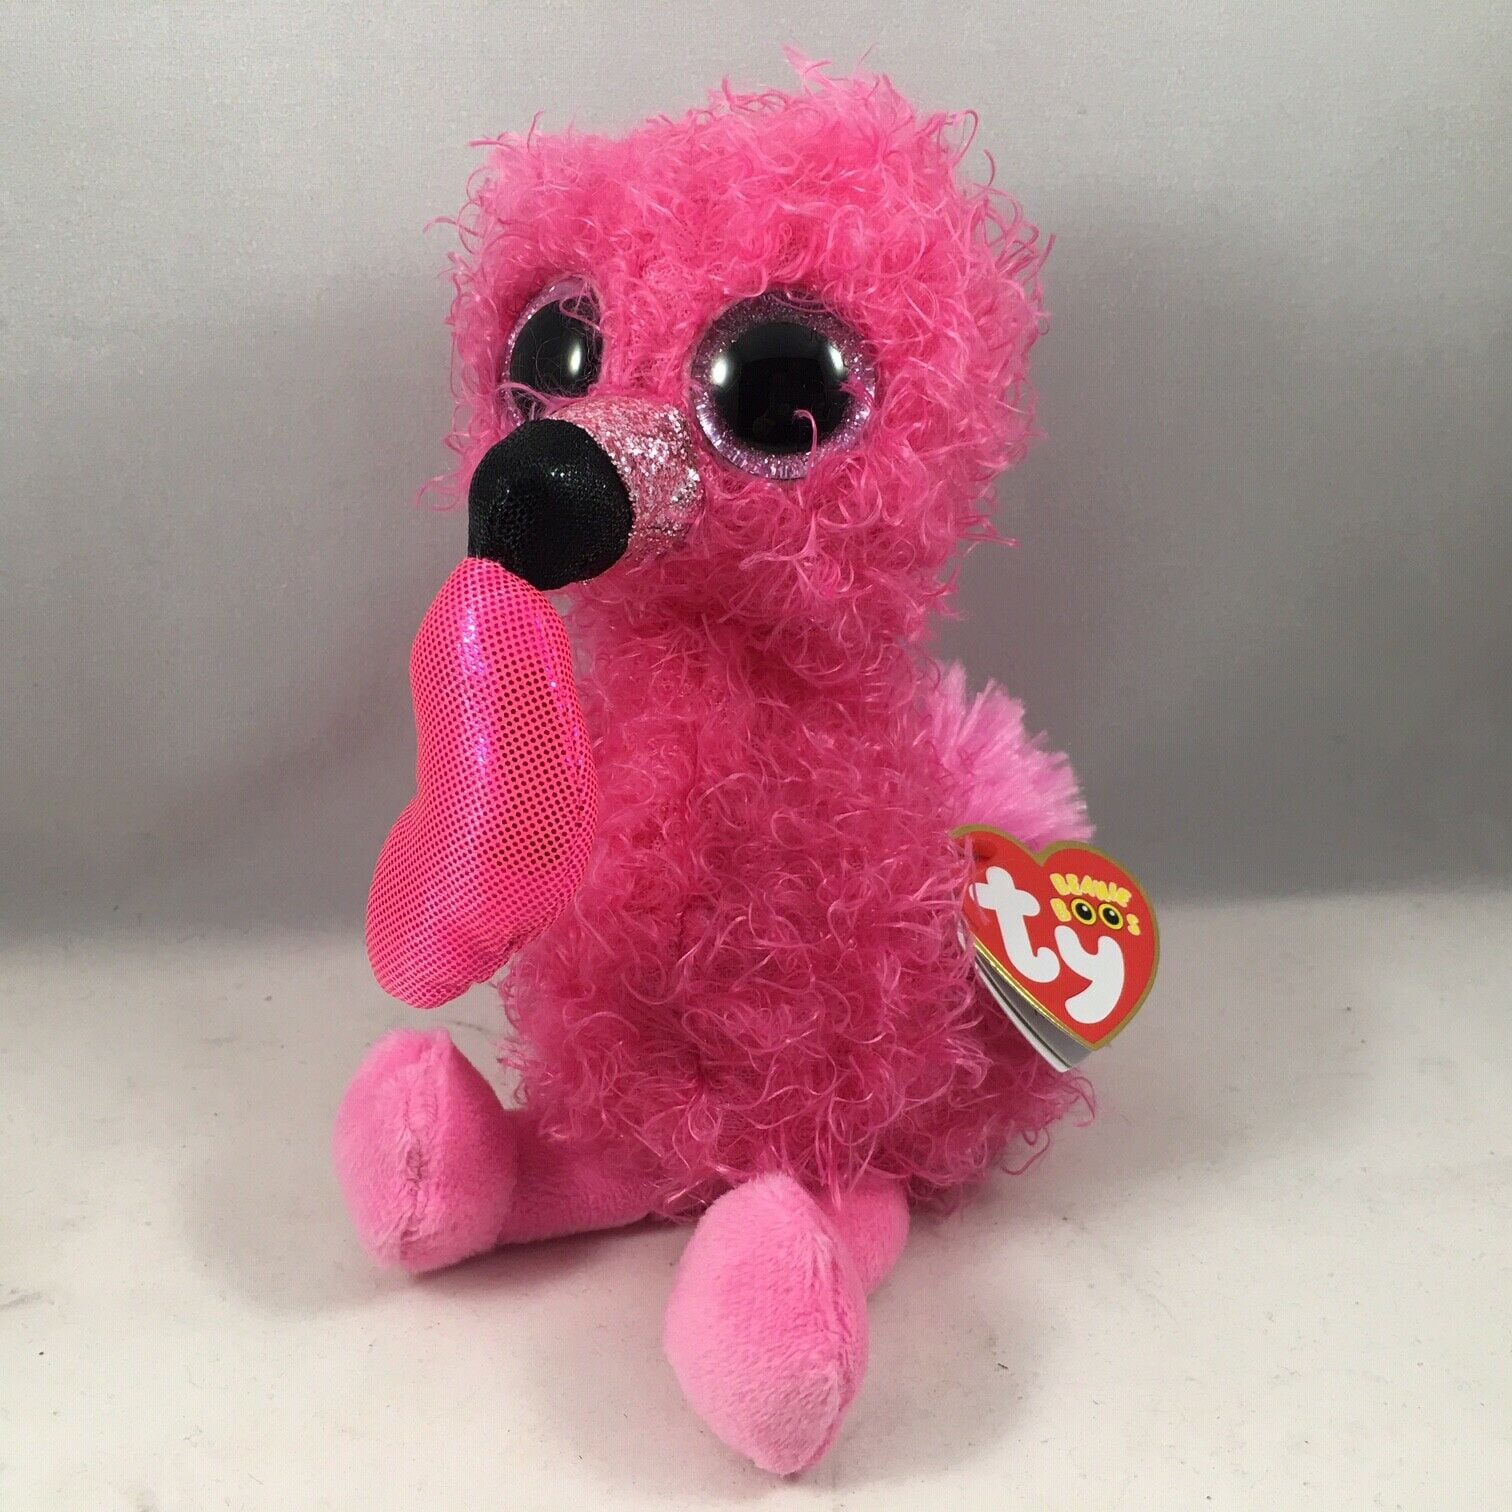 2017 Ty Beanie Boos for Valentine's Day 2018 ROMEO The Dog 6" for sale online 